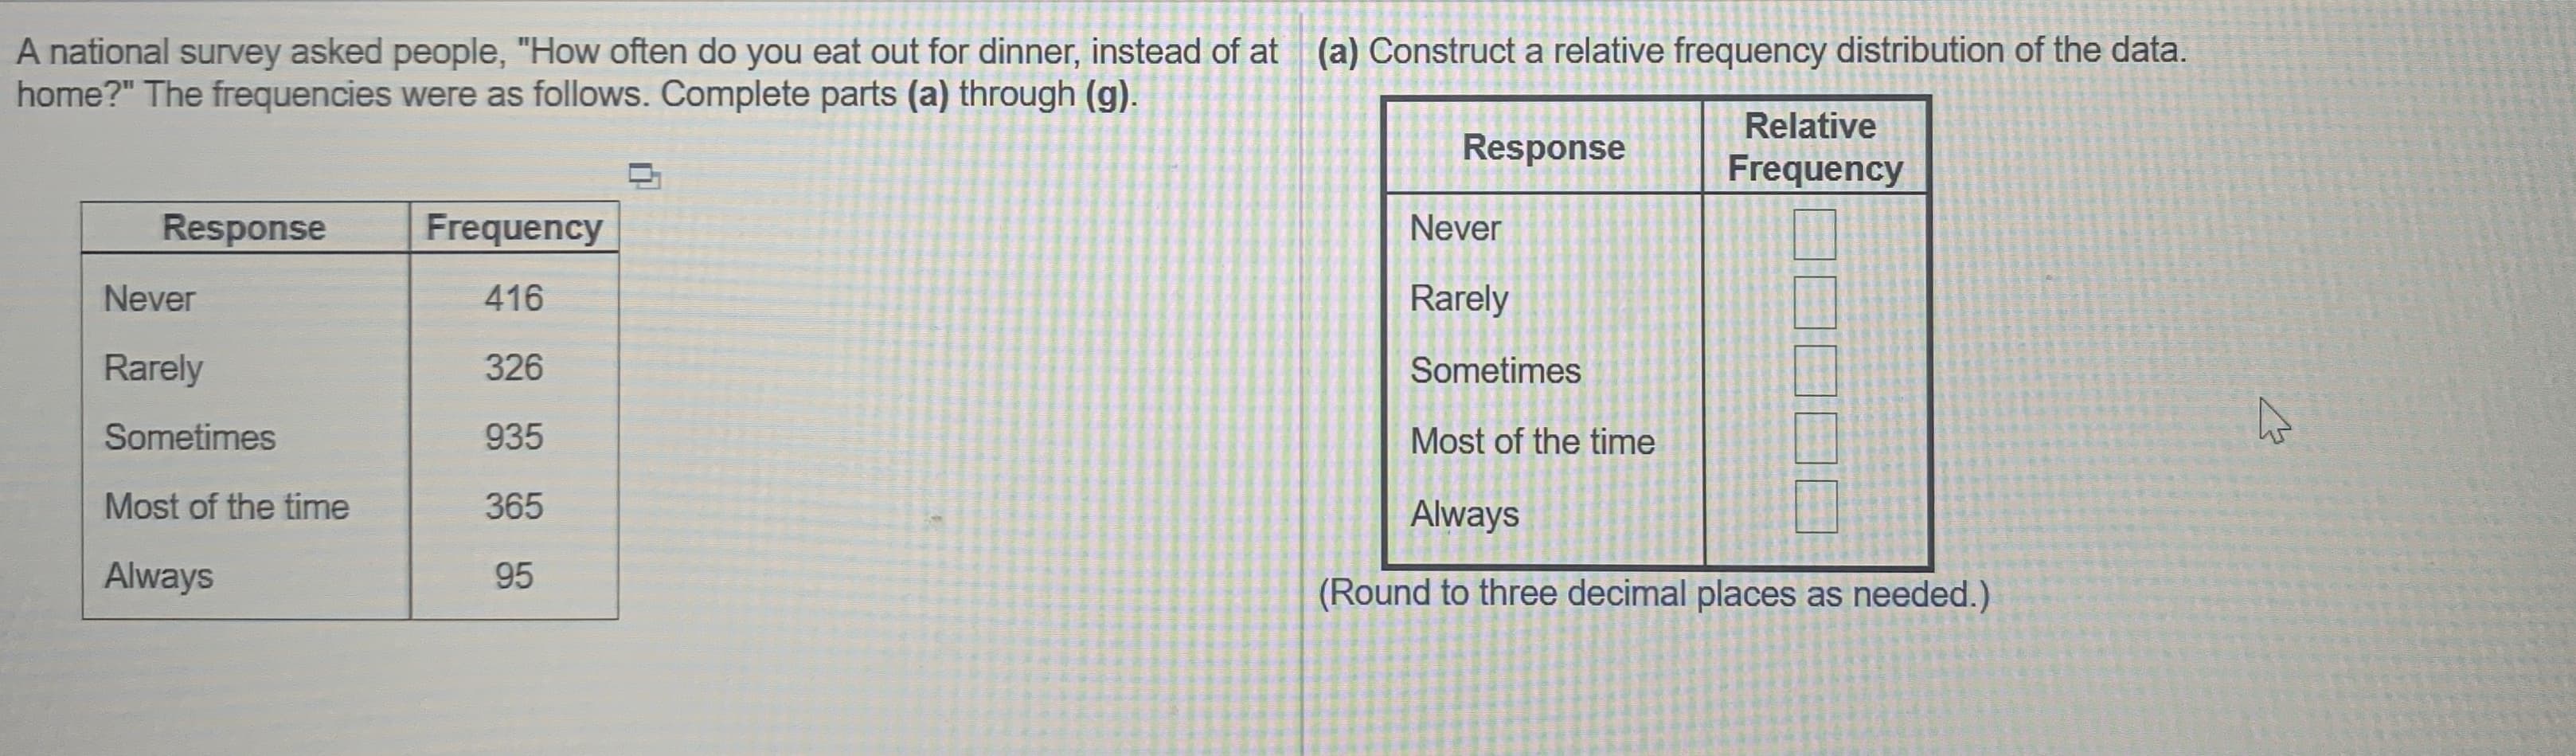 A national survey asked people, "How often do you eat out for dinner, instead of at (a) Construct a relative frequency distribution of th
home?" The frequencies were as follows. Complete parts (a) through (g).
Relative
Response
Frequency
Response
Frequency
Never
Never
416
Rarely
Rarely
326
Sometimes
Sometimes
935
Most of the time
Most of the time
365
Always
Always
95
(Round to three decimal places as needed.)
